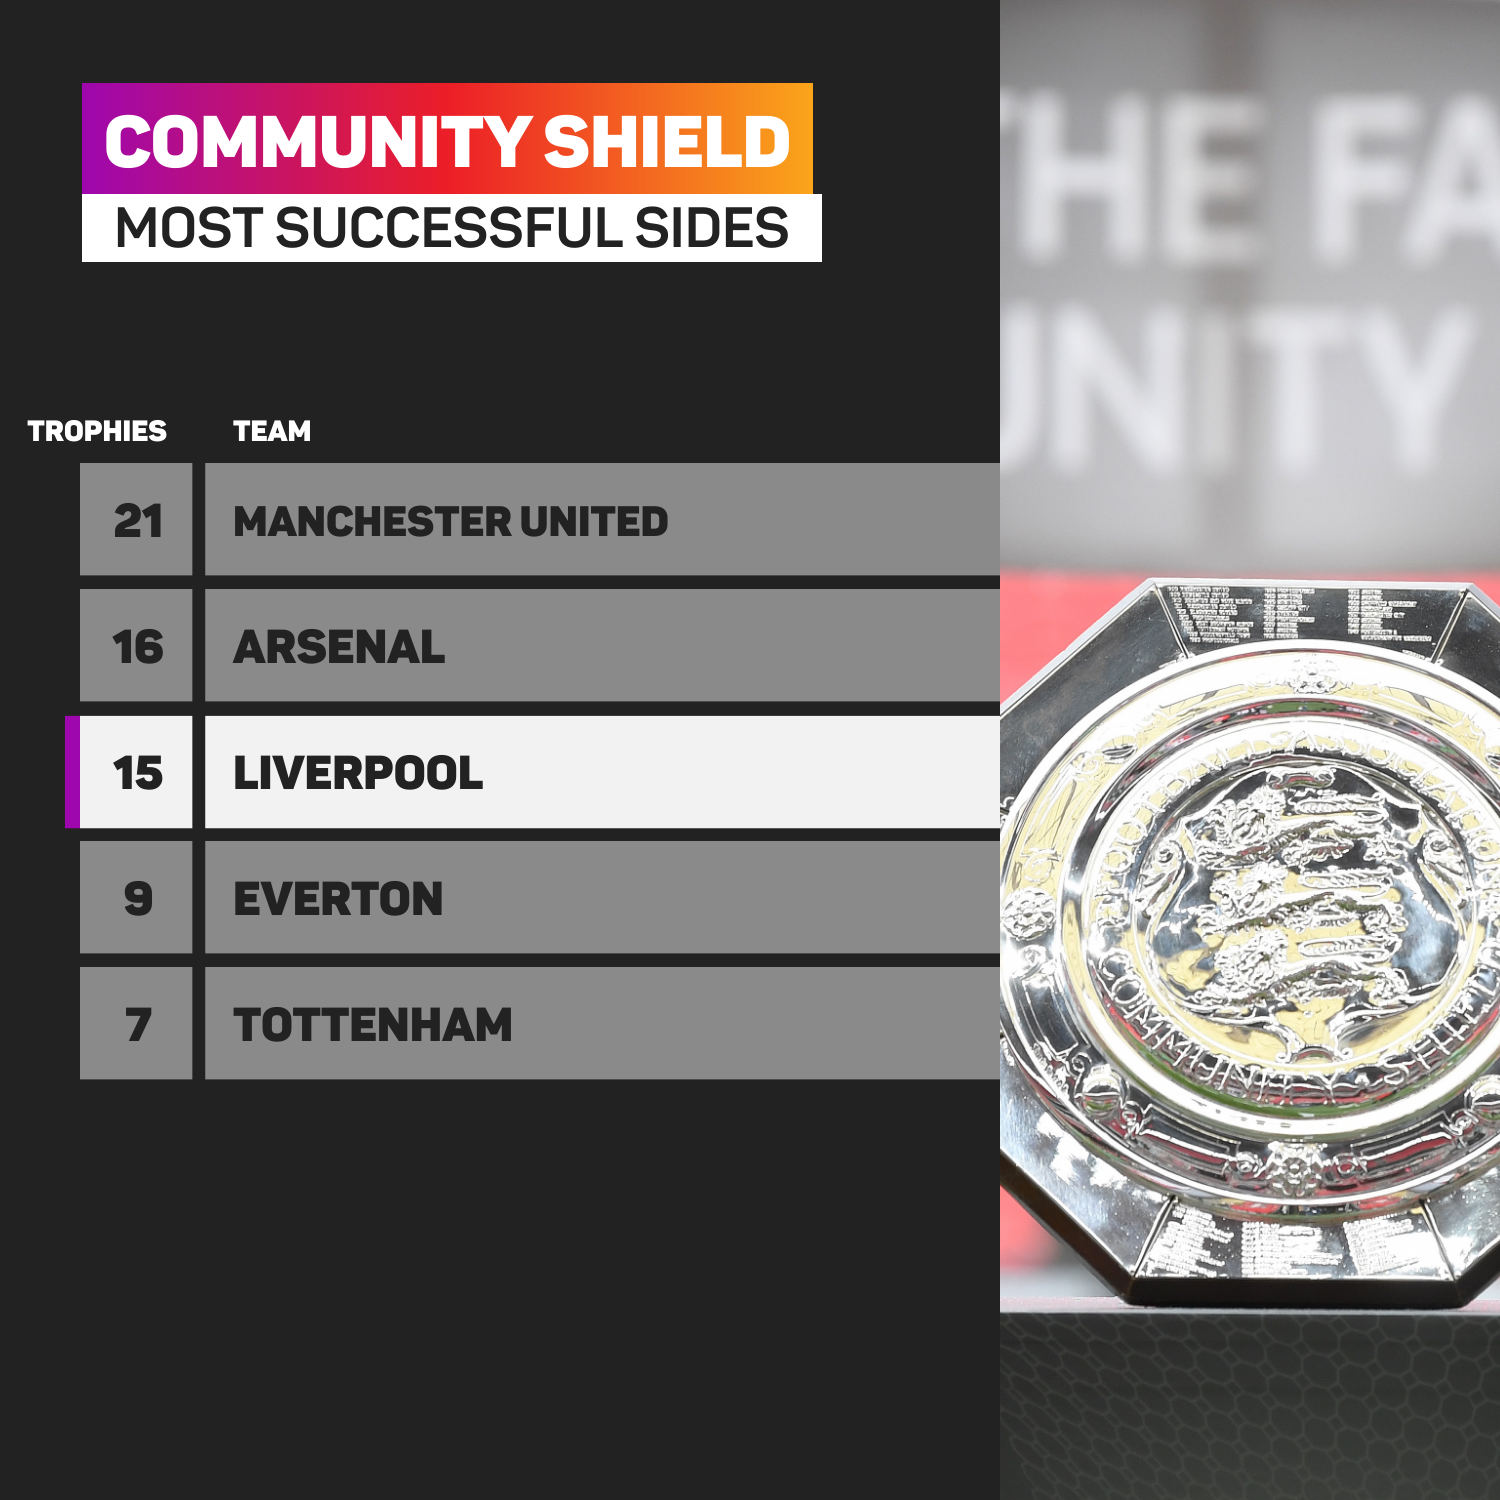 Liverpool have won the Community Shield 15 times